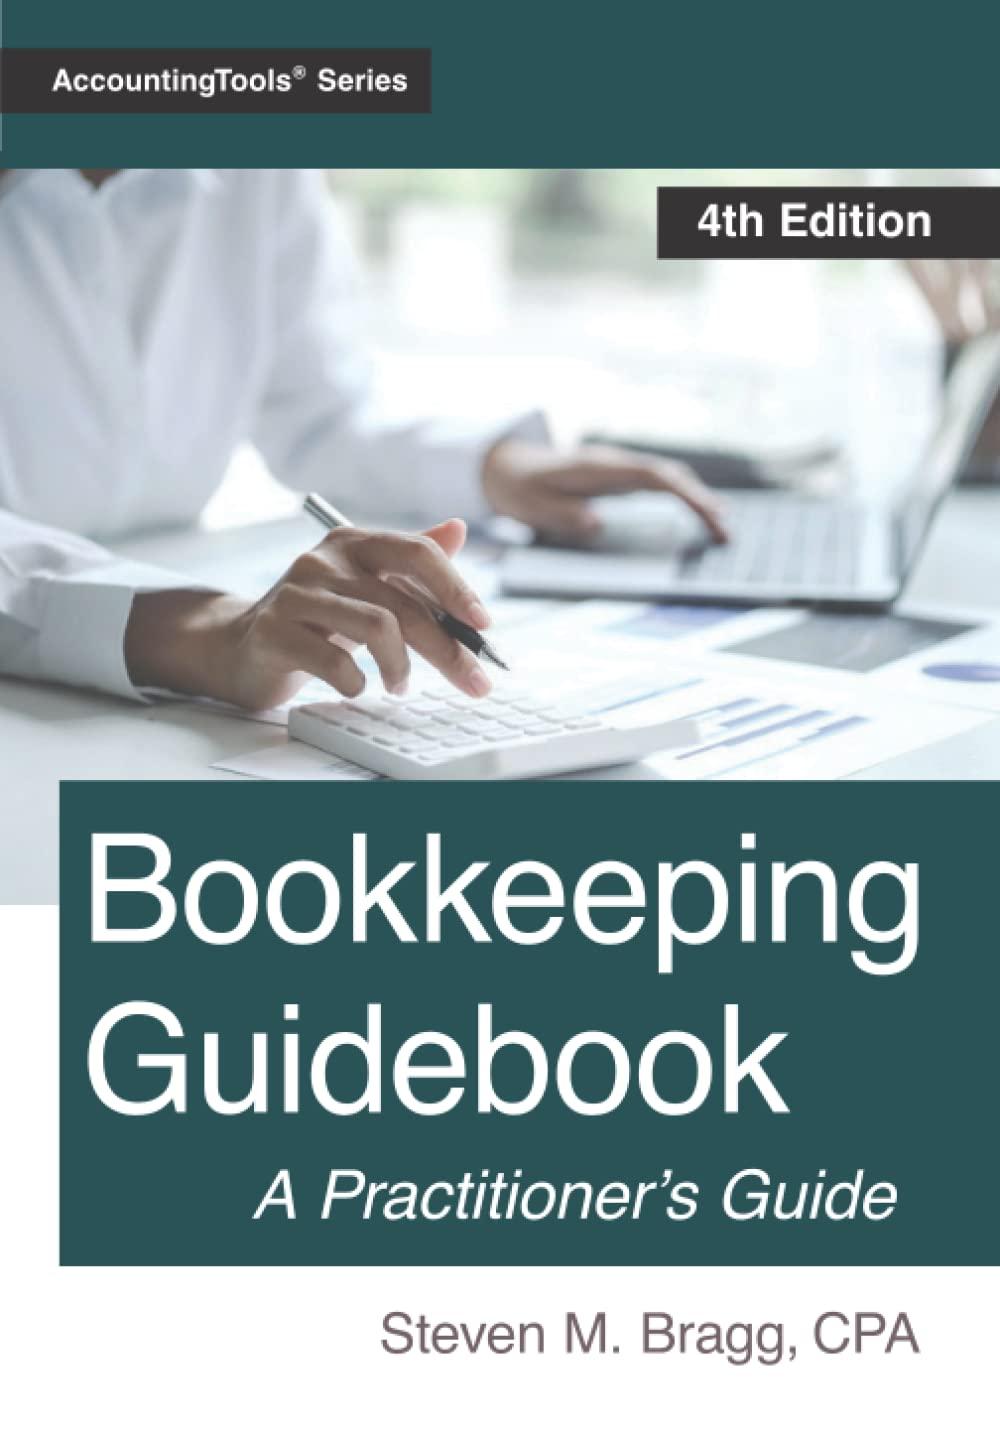 bookkeeping guidebook a practitioners guide 4th edition steven m. bragg 1642210919, 978-1642210910